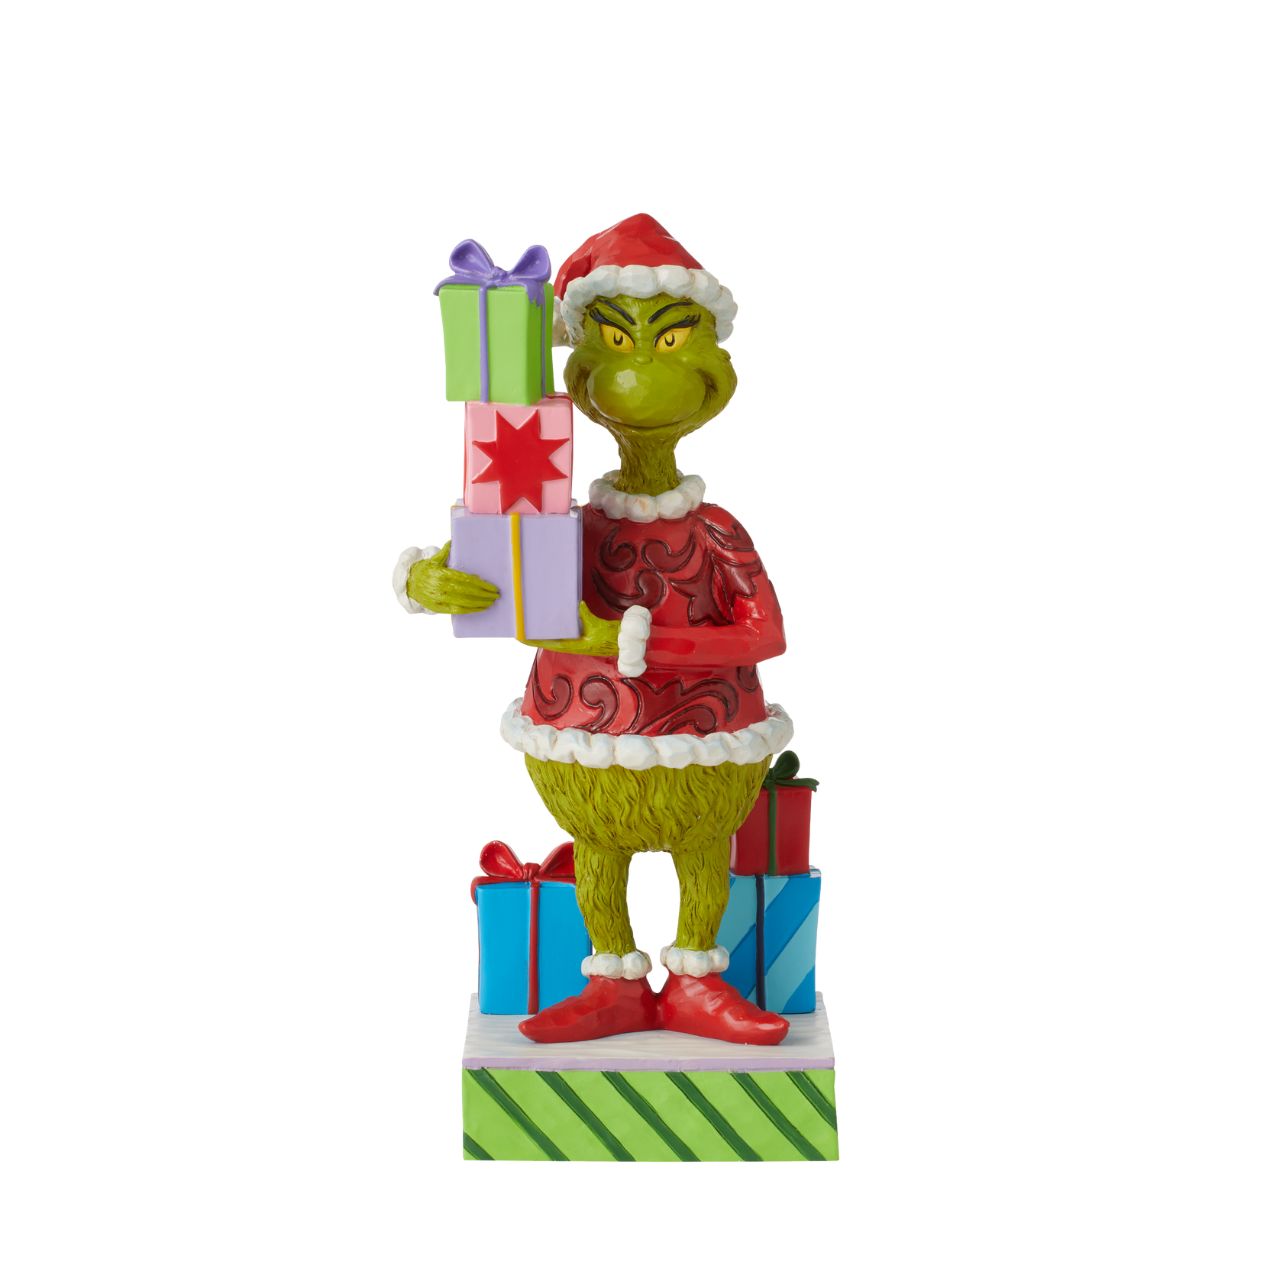 Grinch Holding Presents Figurine  Is the Grinch stealing presents again or has his heart changed to a kinder shape? You decide The Grinch's intentions when placing this colourful Jim Shore design in your home. Whatever his motive, The Grinch is giddy to be apart of your holiday.